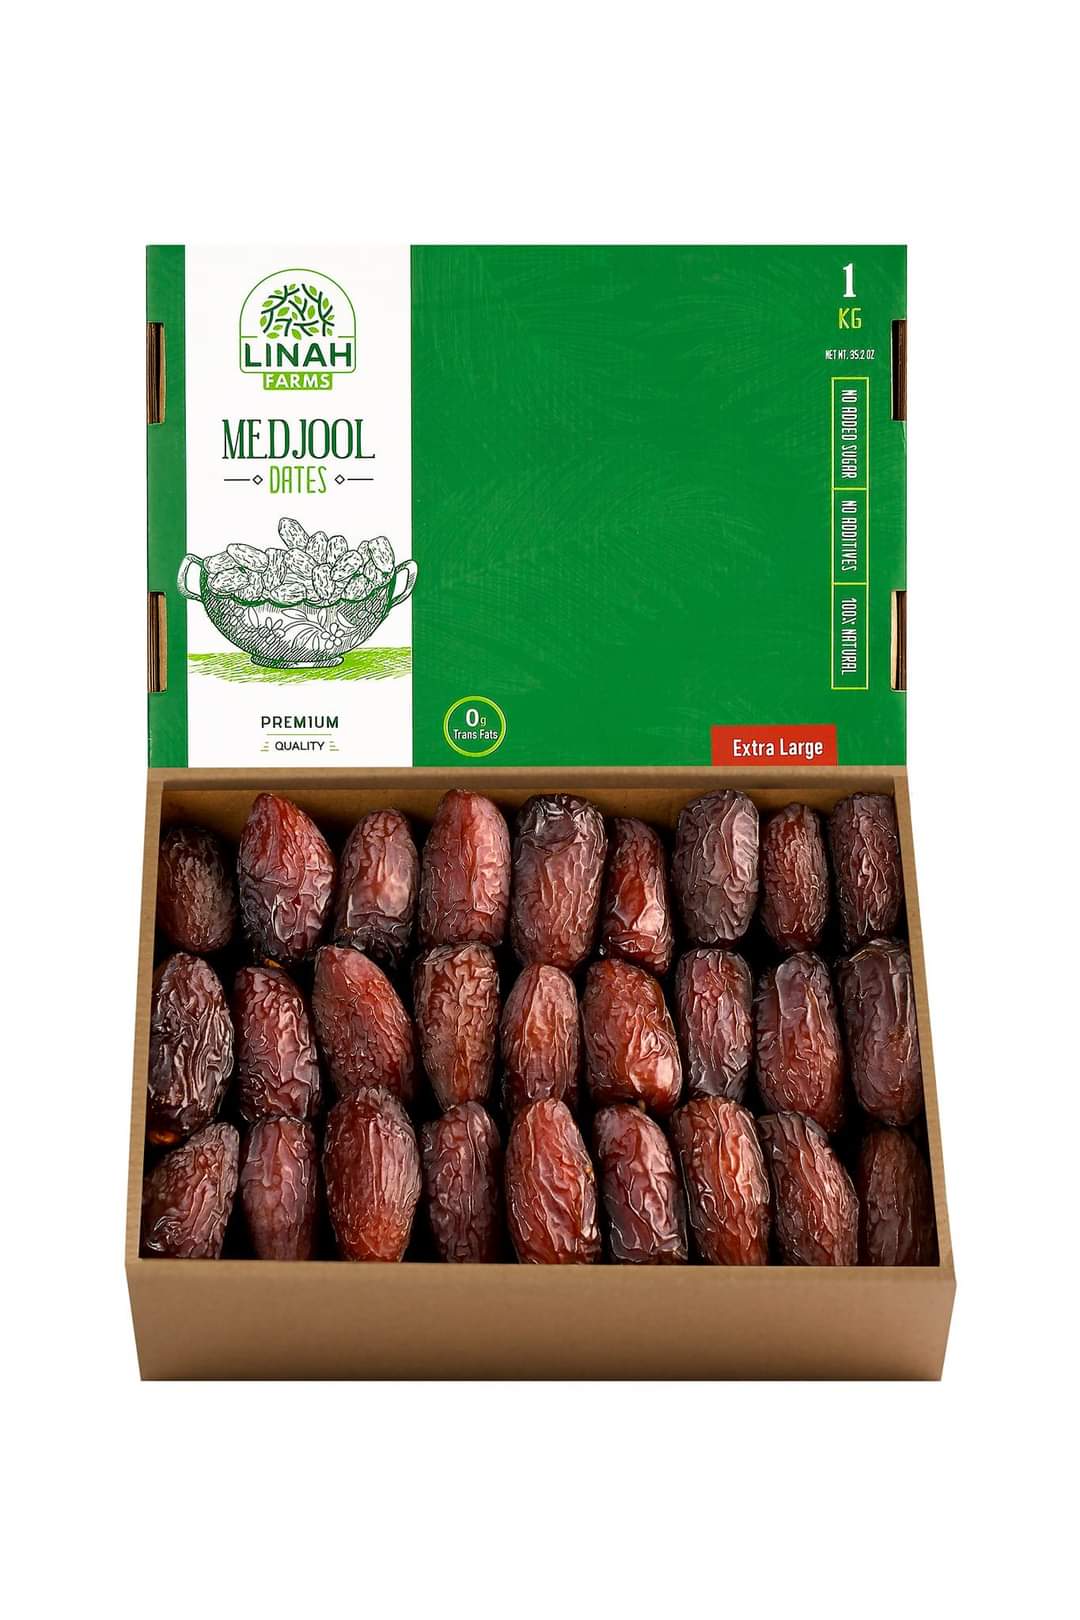 1kg box of Linah Farms Extra large Medjools with open box displaying the dates.